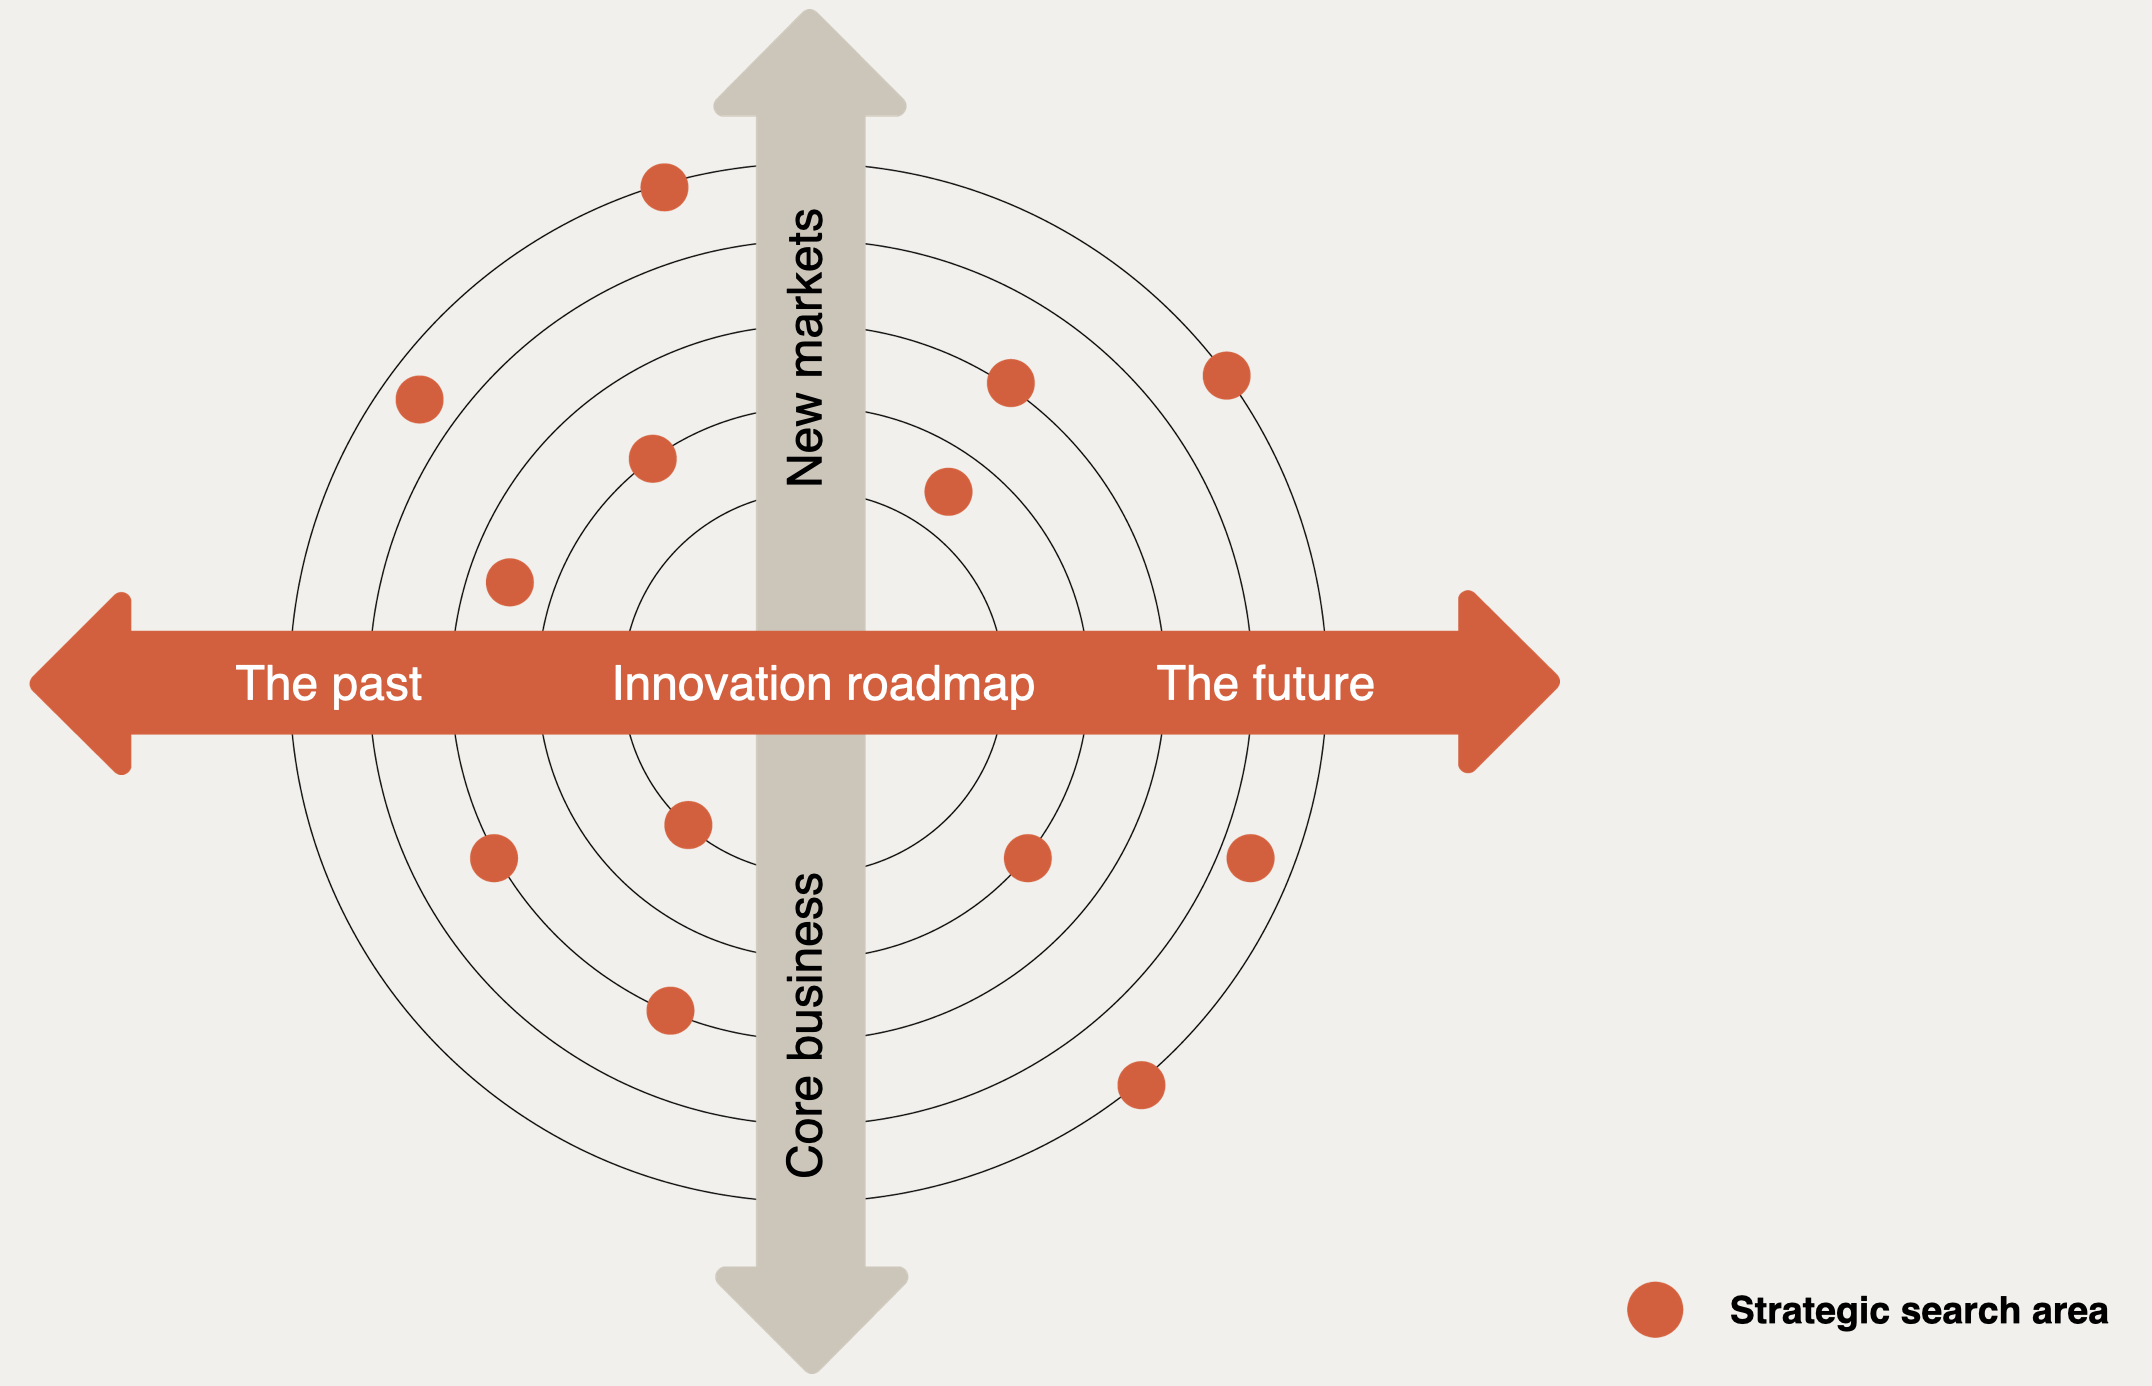 With the Innovation Roadmap, you keep an eye on the core business and new markets, as well as the future and the past.